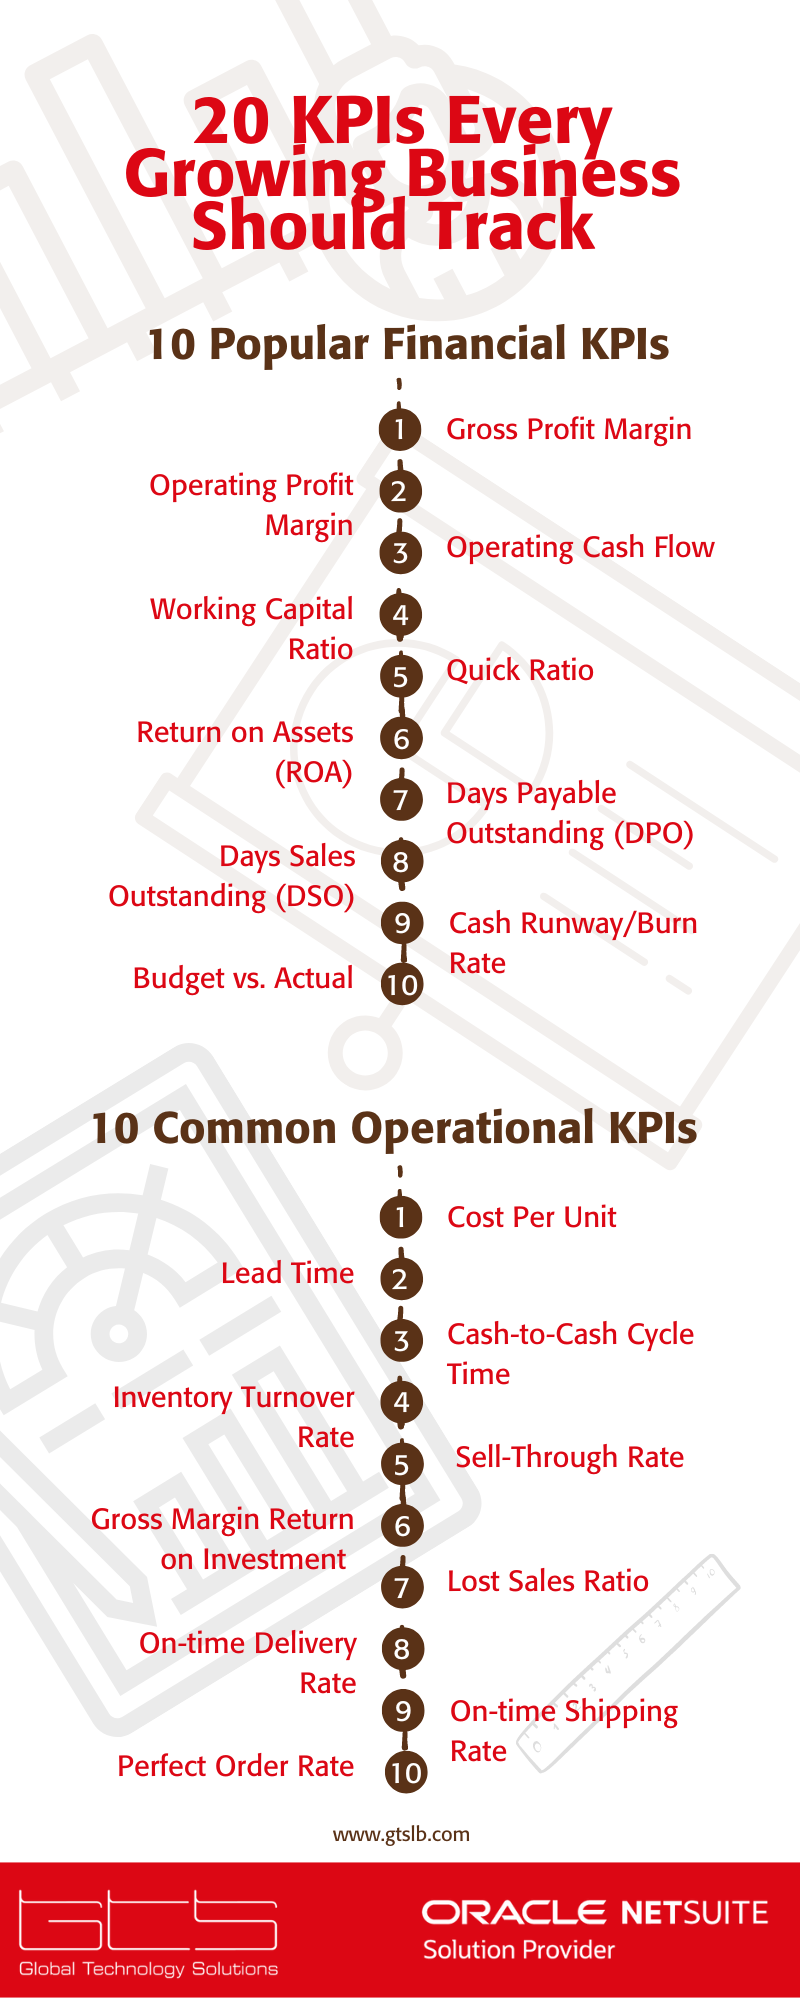 20 KPIs Every Growing Business Should Track Infographic